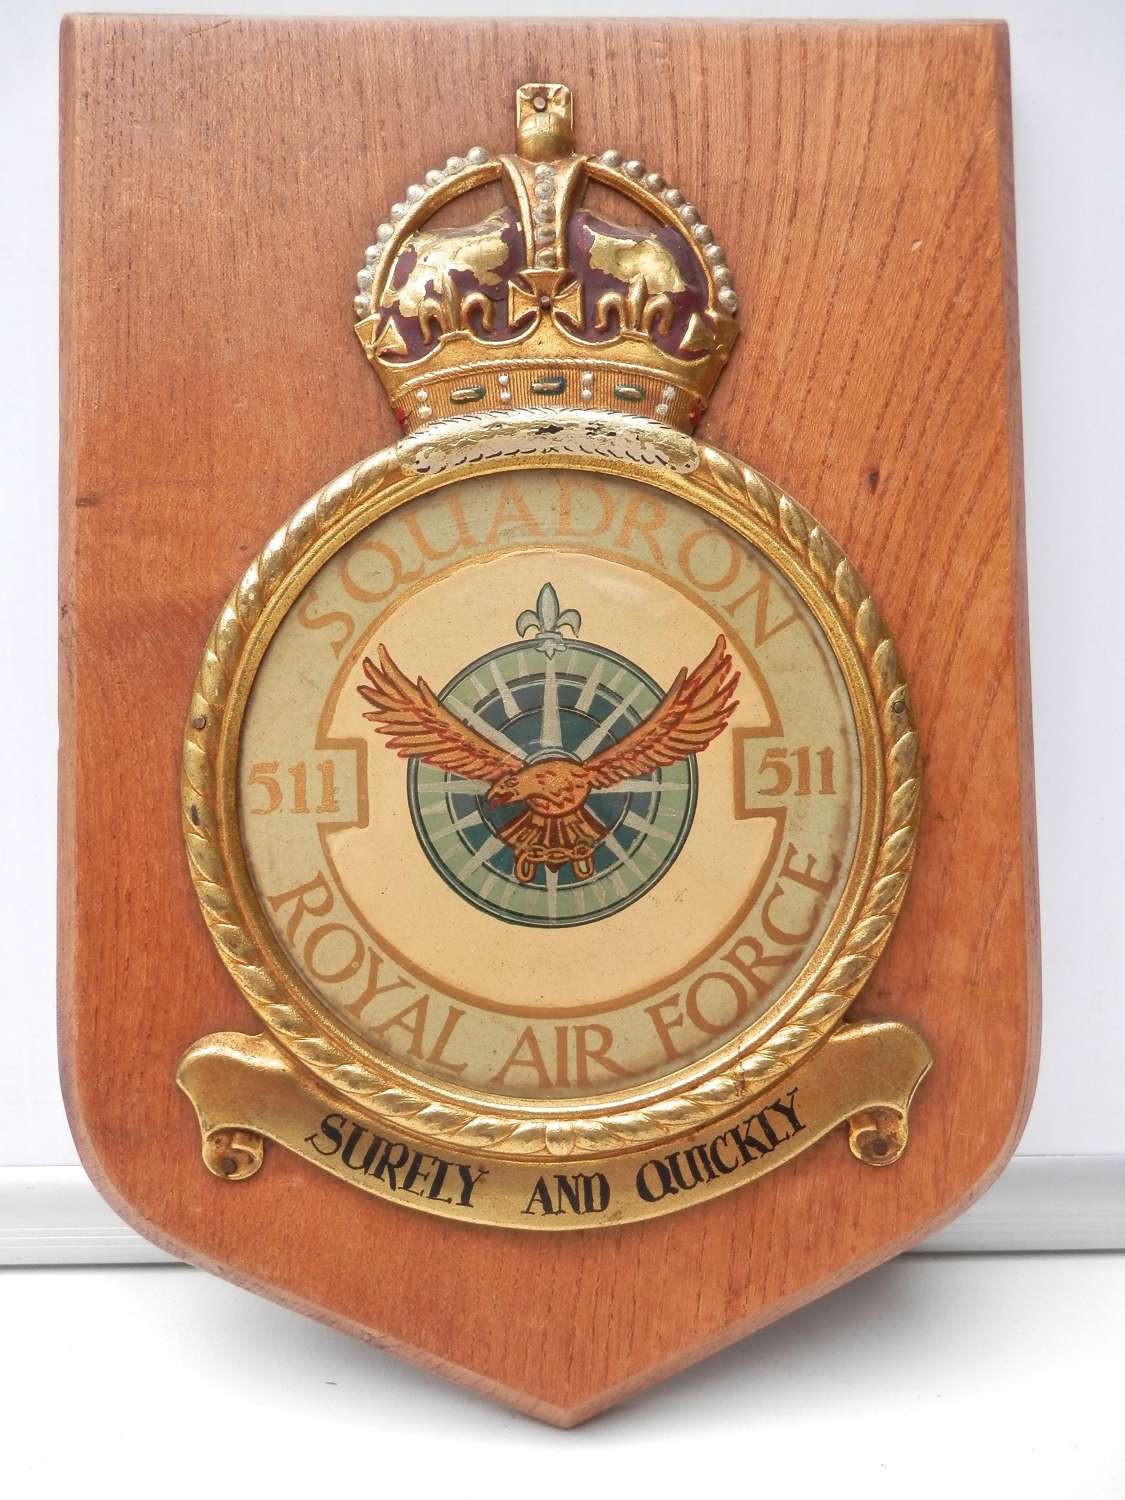 WW2 hand painted RAF 511 squadron plaque